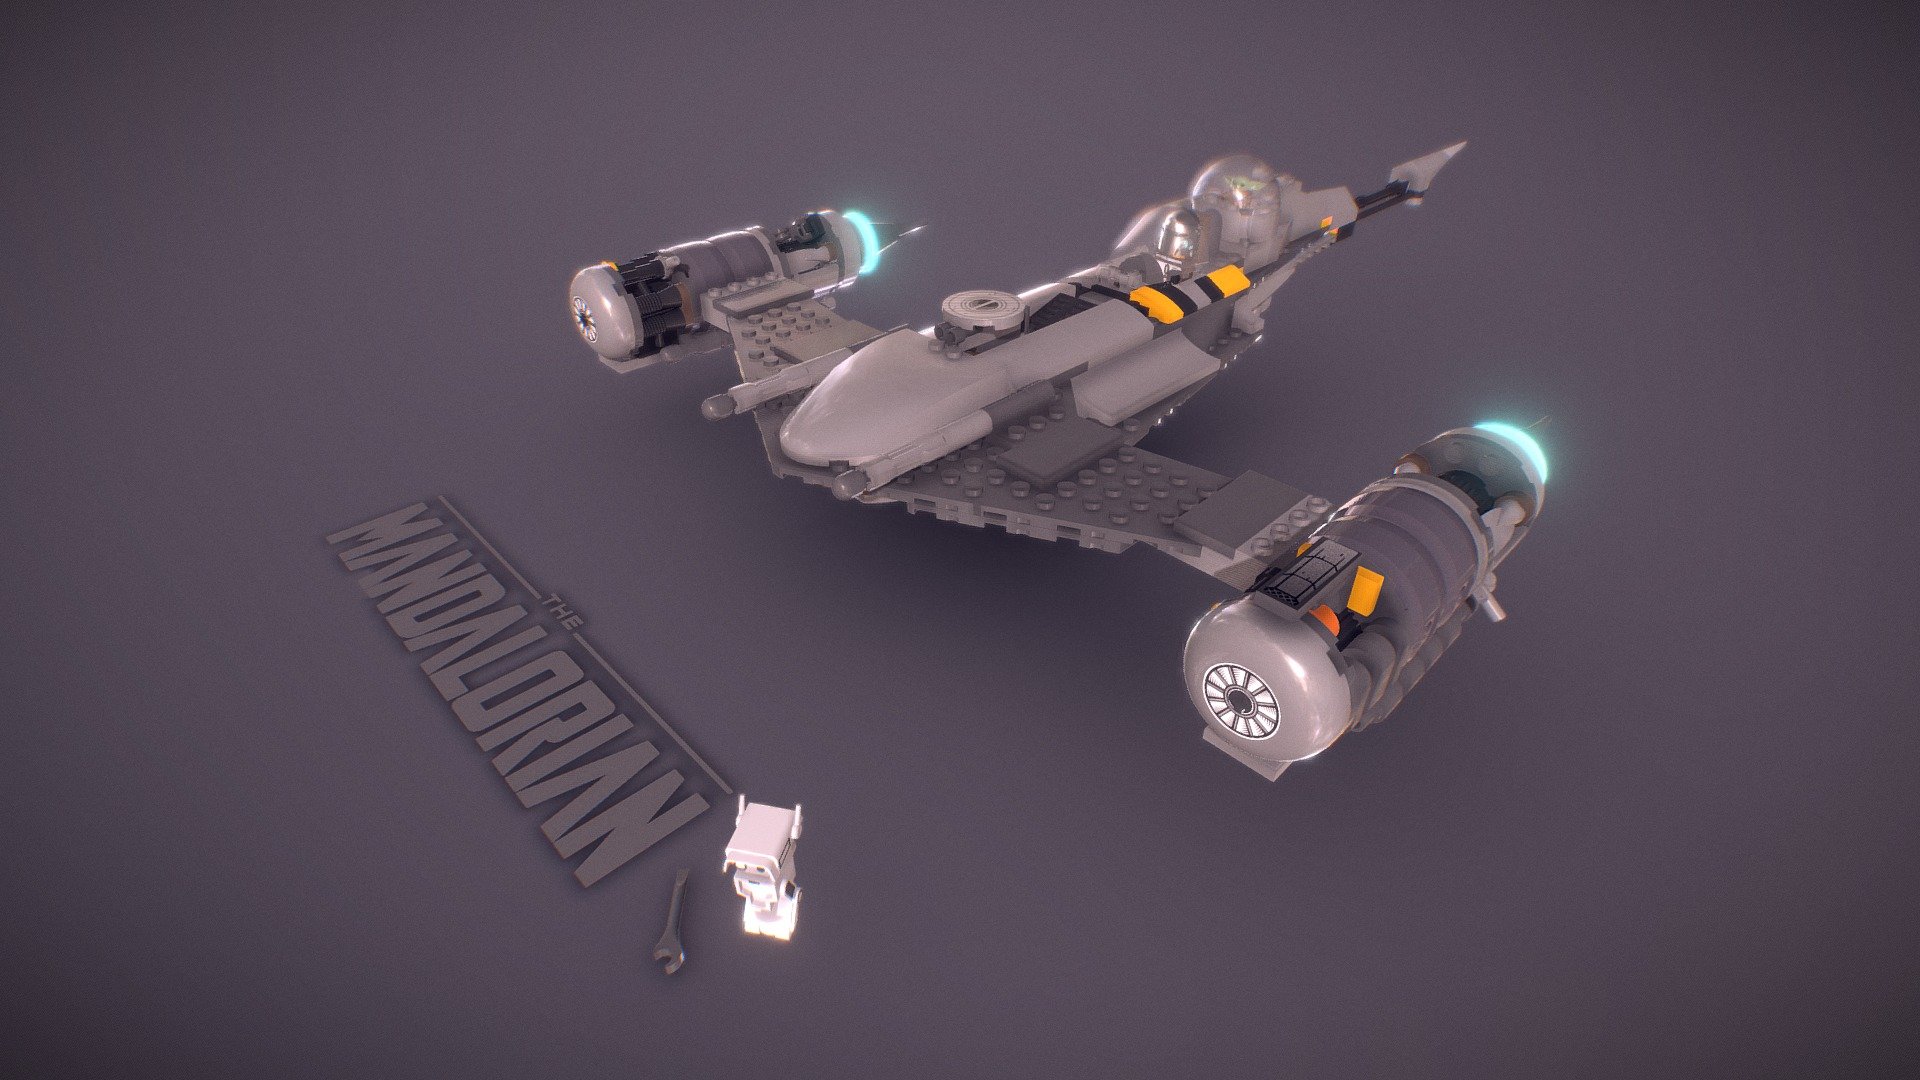 Just playing arround with some LEGO's in Blender.

Grogu model was made by https://sketchfab.com/micaelsampaio - The Mandalorian - LEGO N 1 Starfighter - Download Free 3D model by ChrisLee (@chrisleeX) 3d model